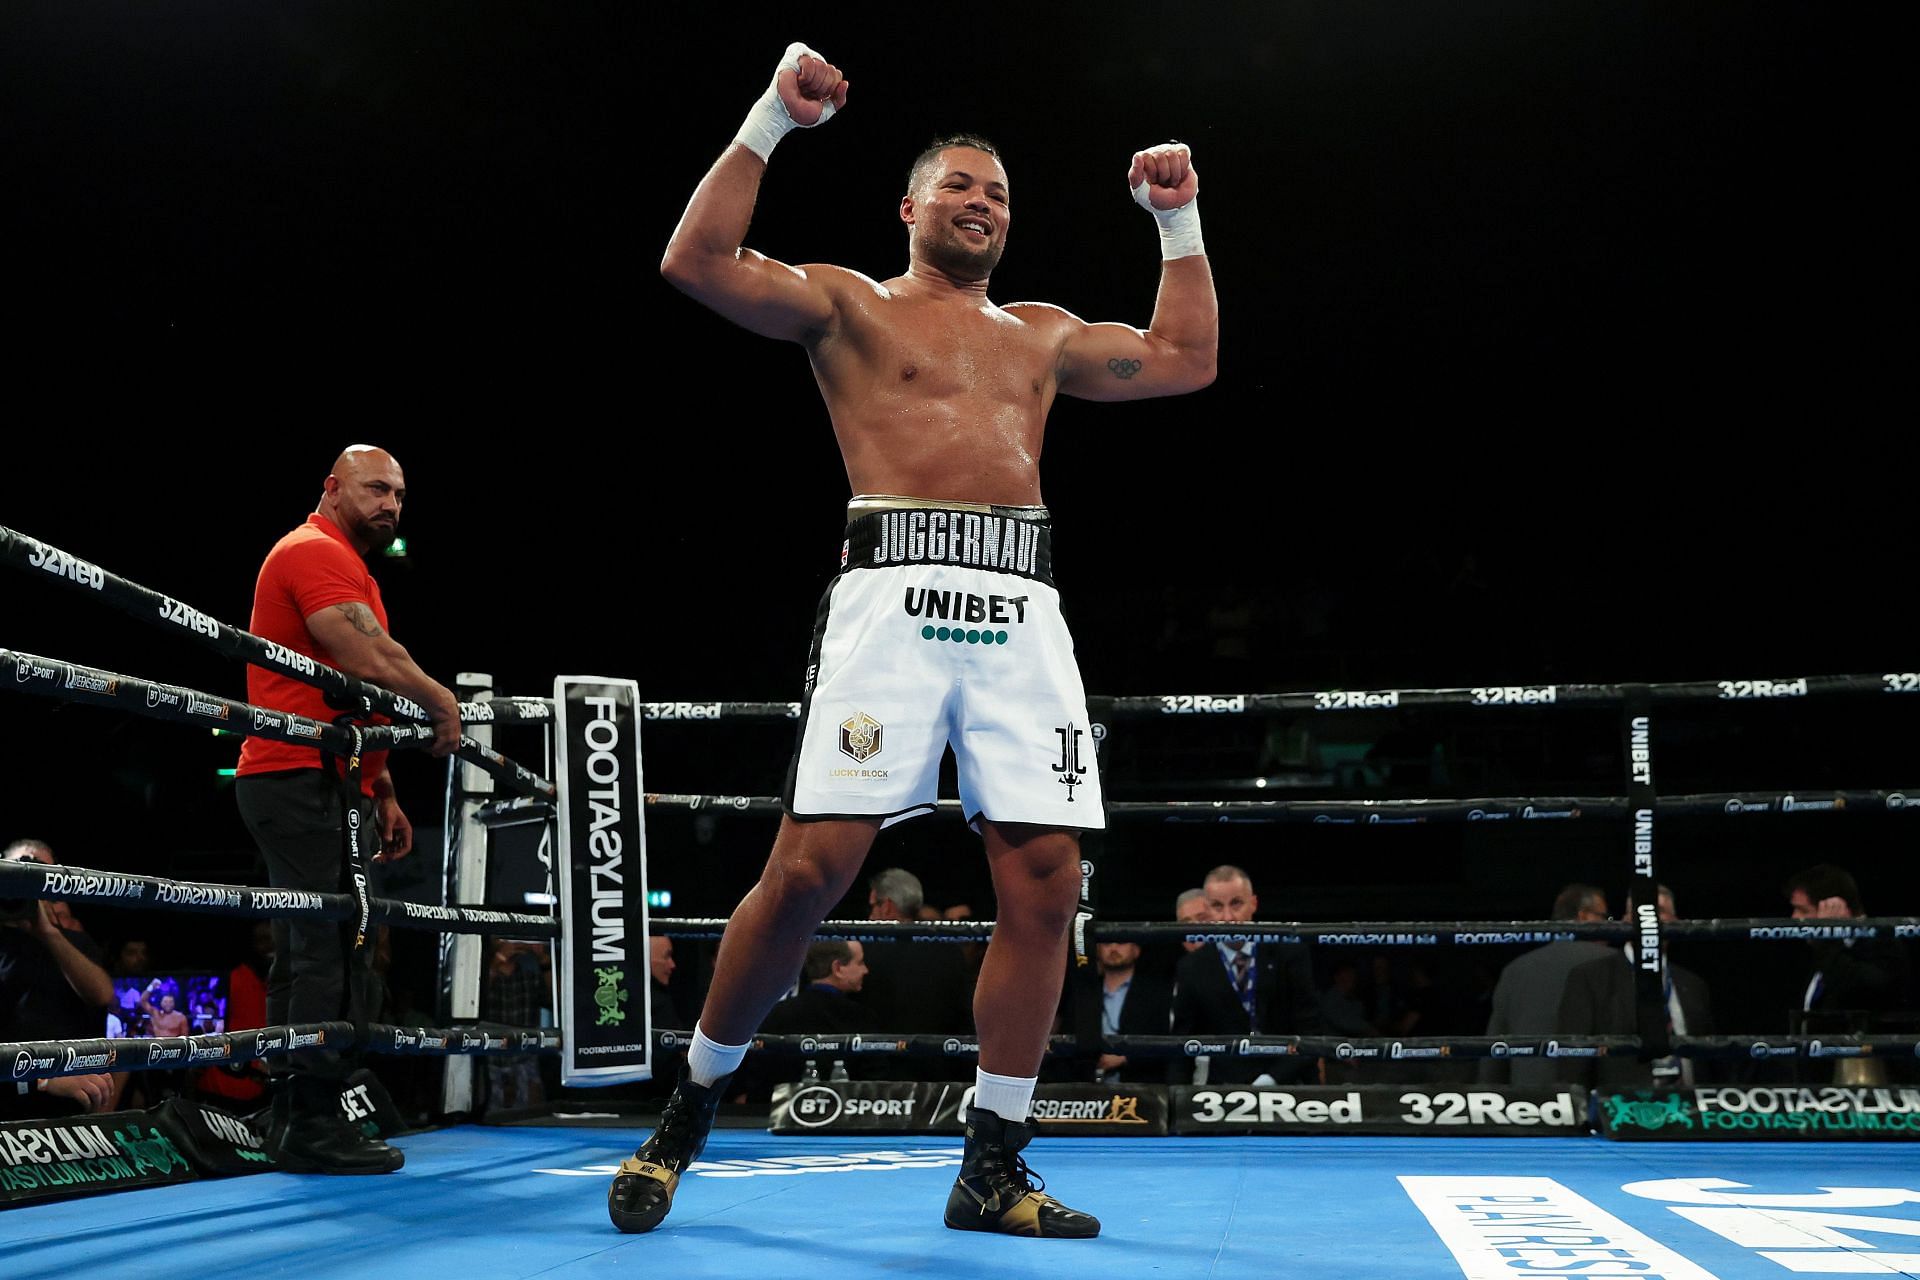 Joe Joyce celebrates after defeating Christian Hammer at OVO Arena Wembley on July 02, 2022 in London, England [Photo by James Chance/Getty Images]